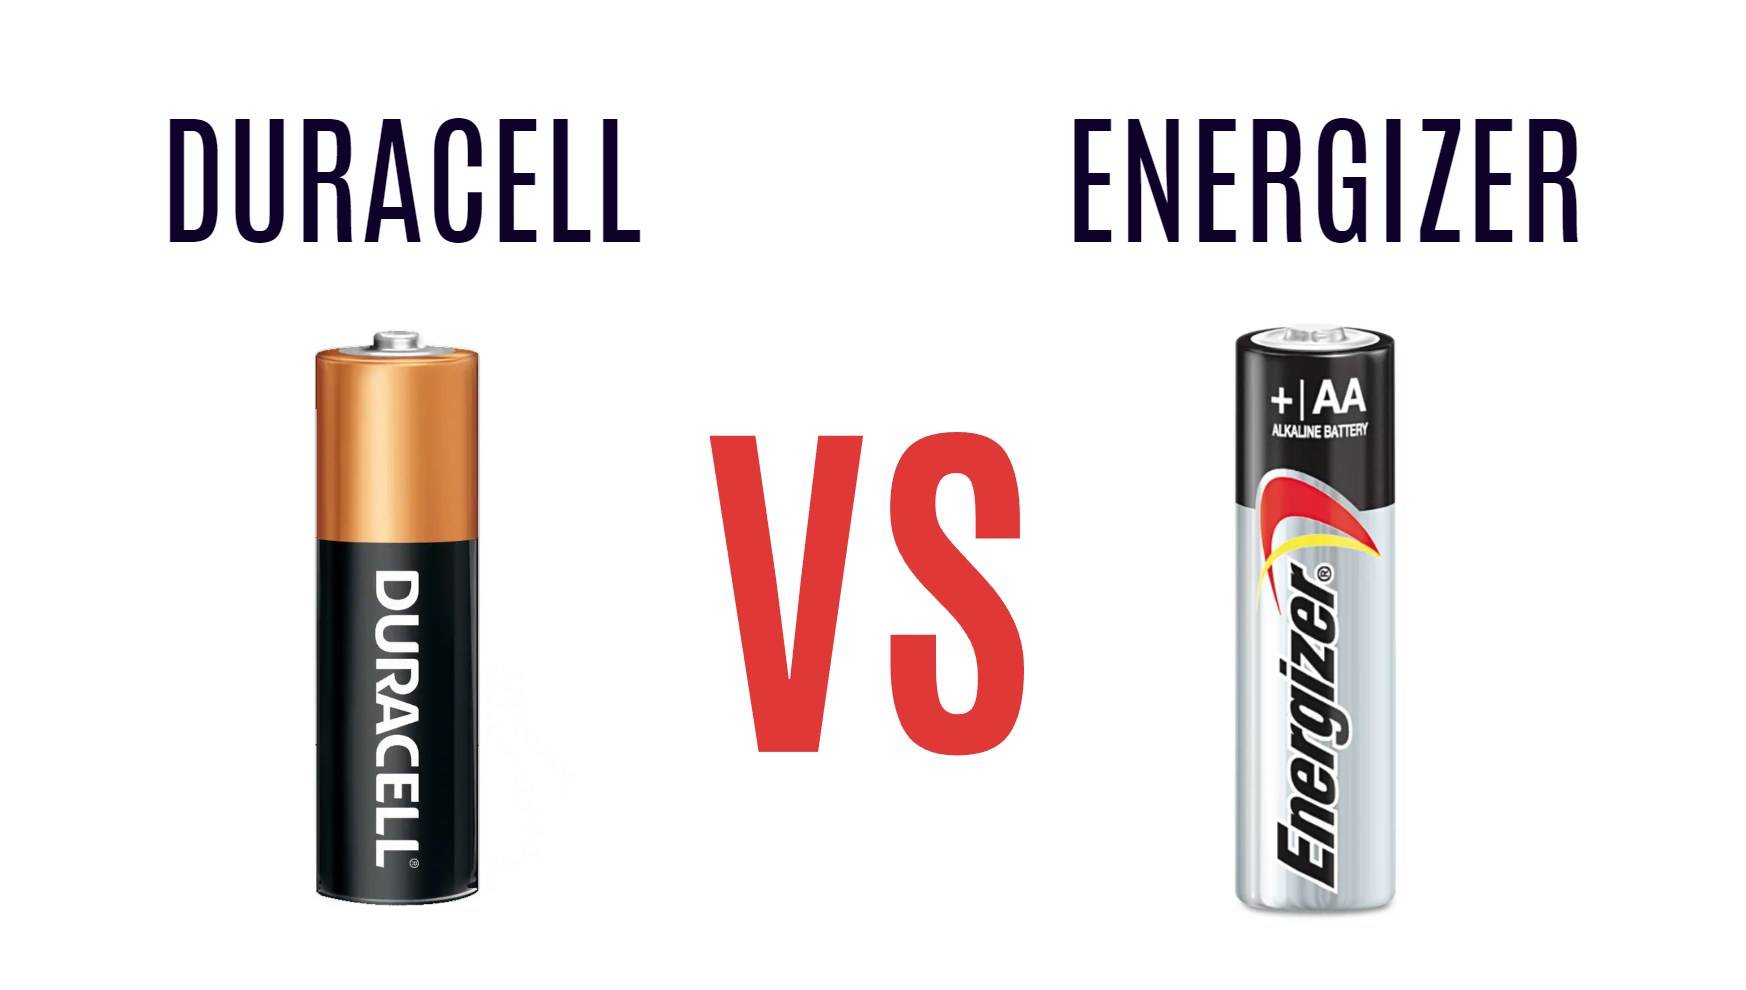 Duracell vs Energizer: Battery Life, Leak Concerns, and Quality Insights